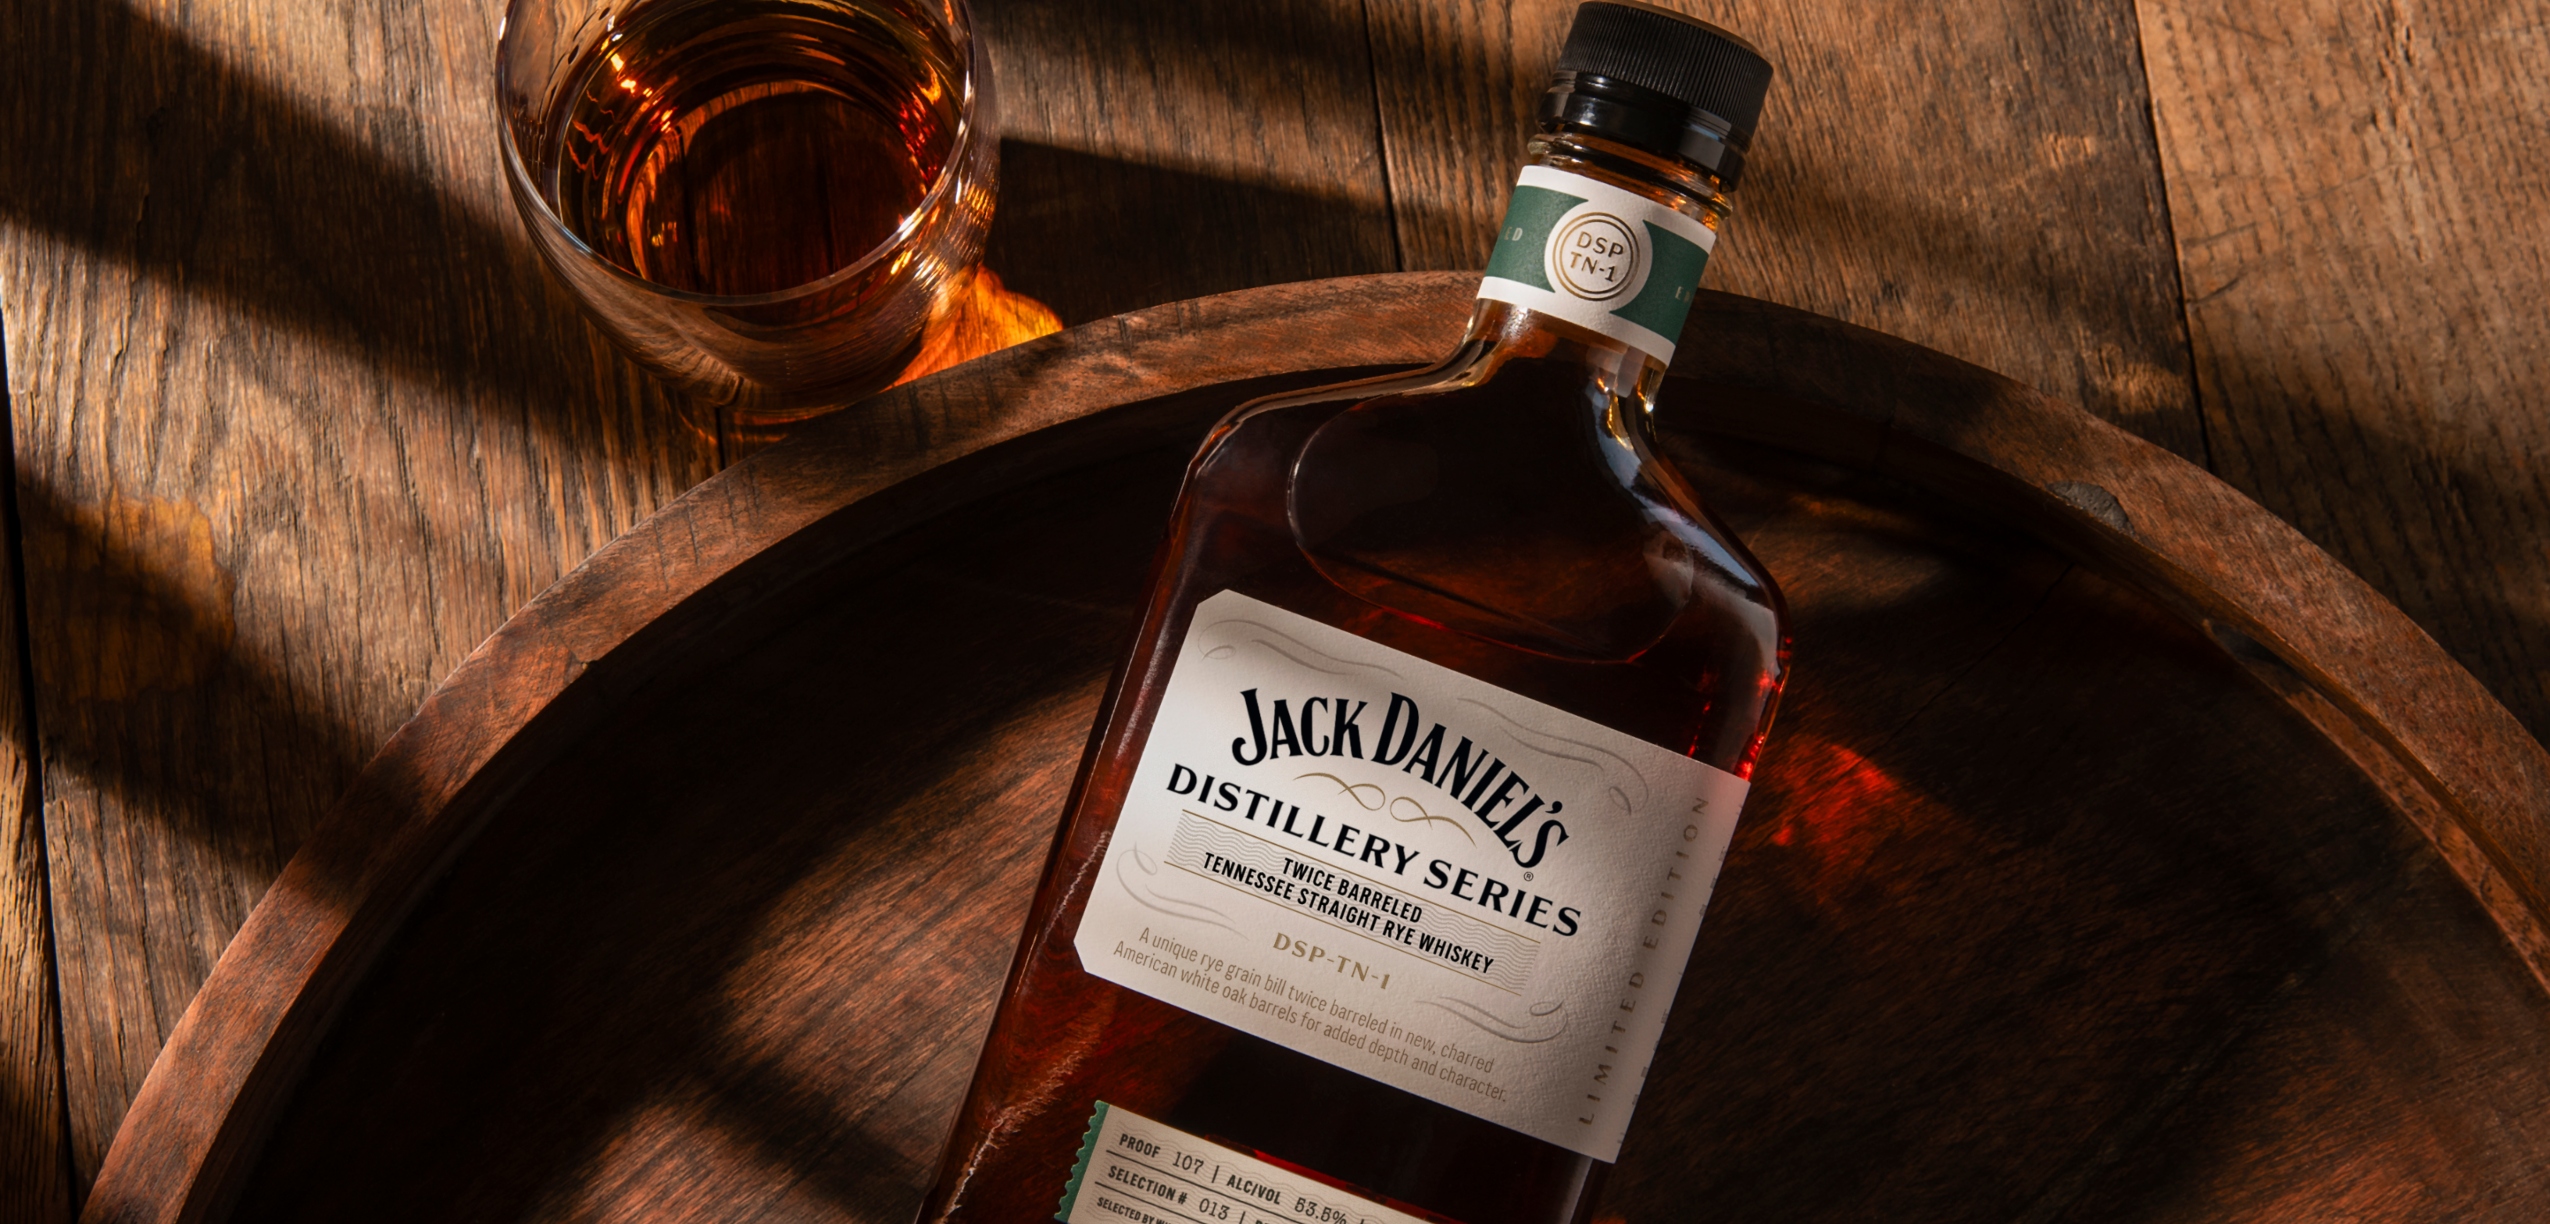 Jack Daniel’s Distillery Series launches Twice-Barreled Tennessee Straight Rye Whiskey